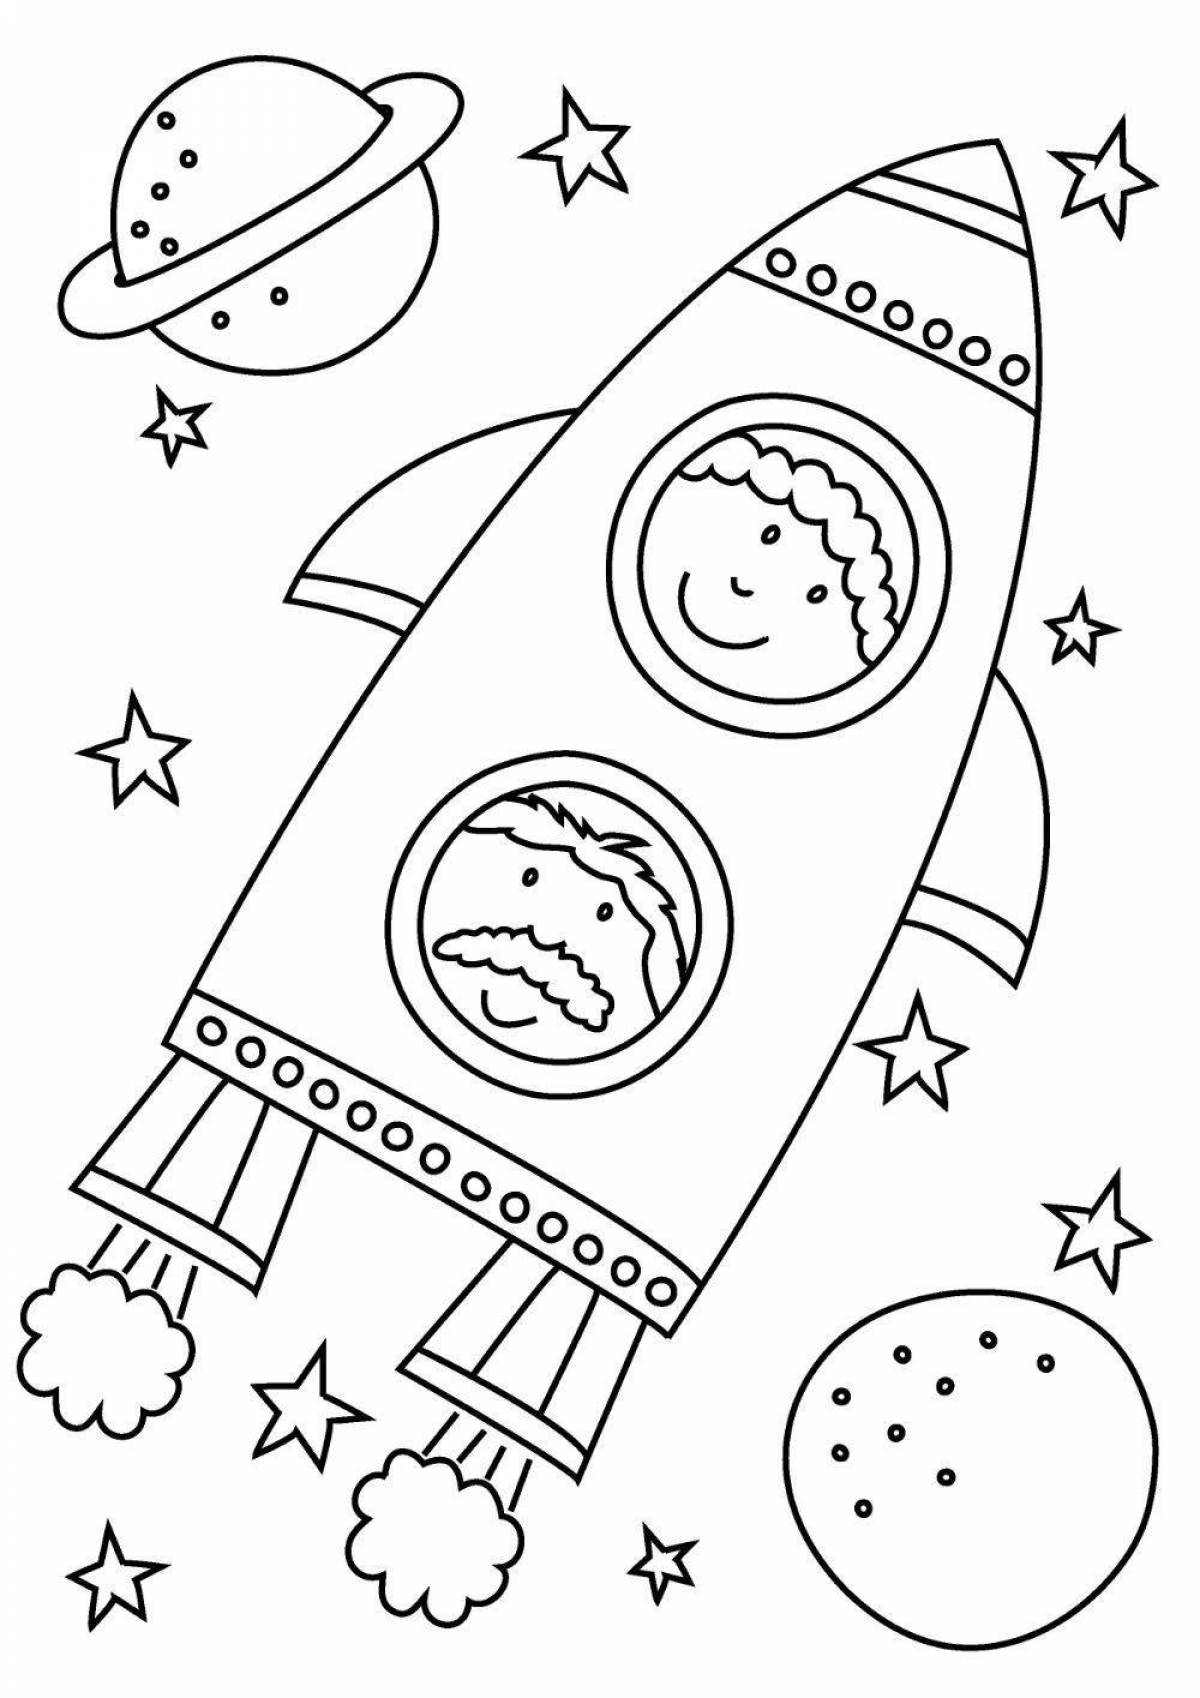 Fantastic space coloring book for kids